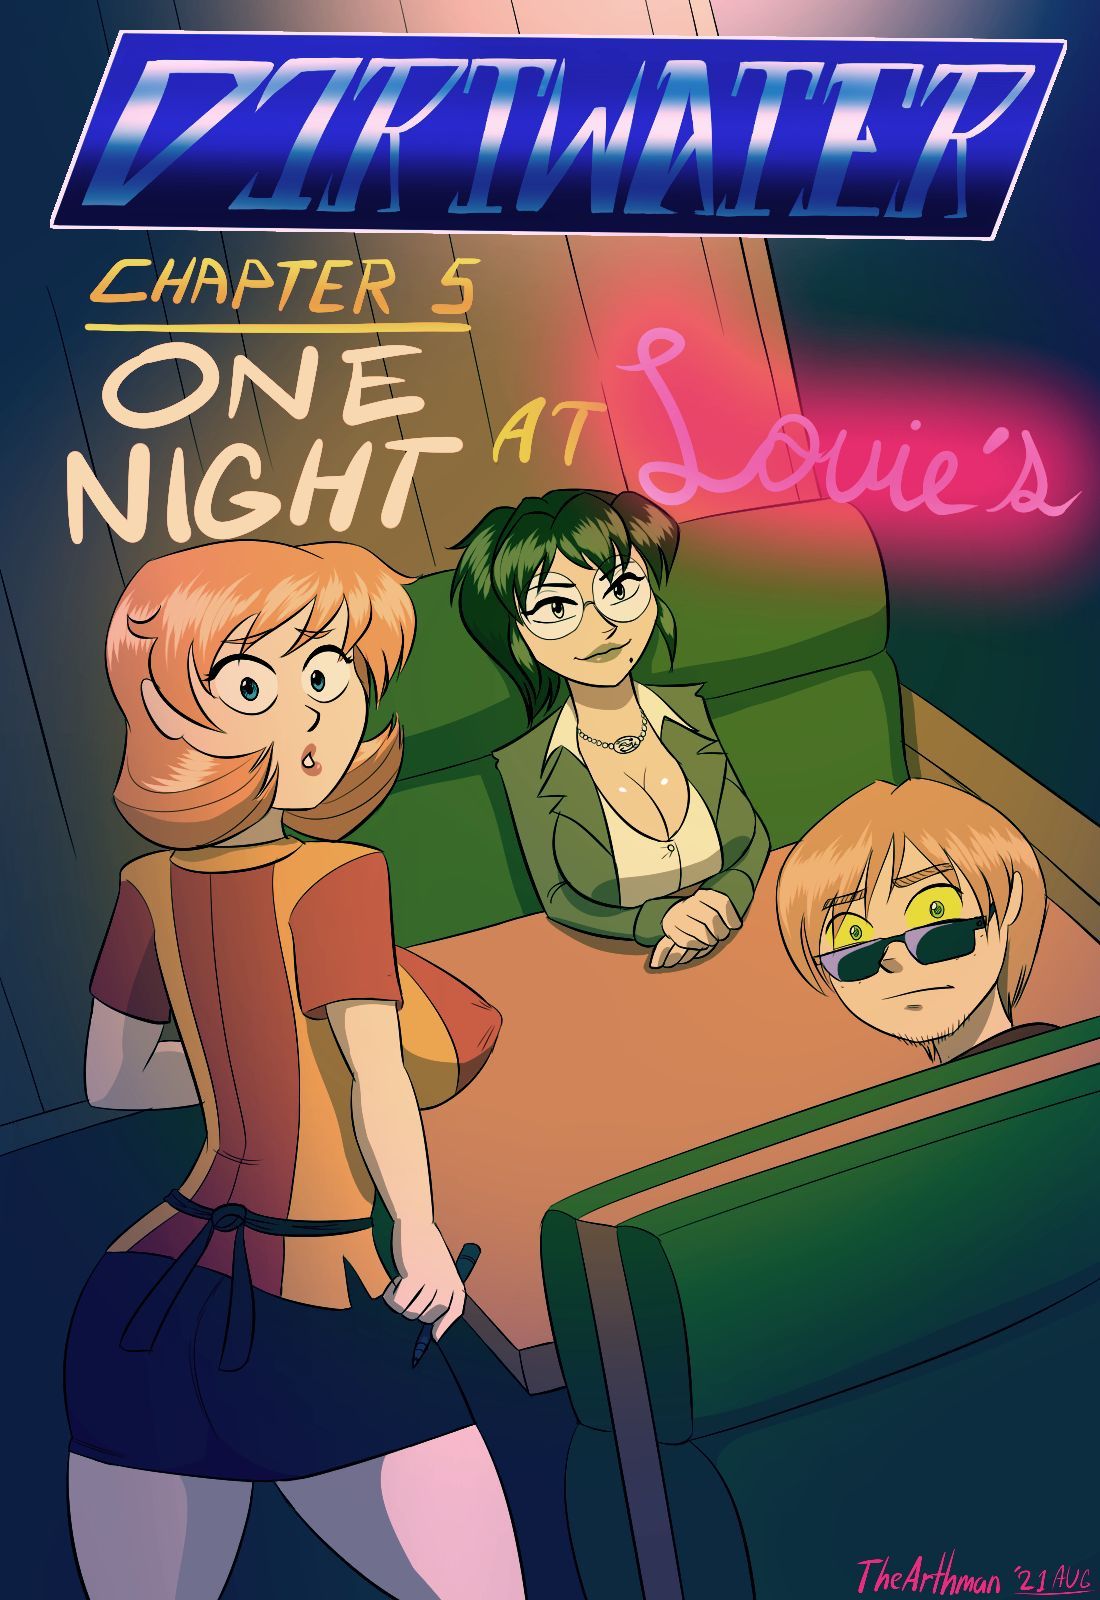 [The Arthman] Dirtwater - Chapter 5 - One Night at Louie's (ongoing) 1